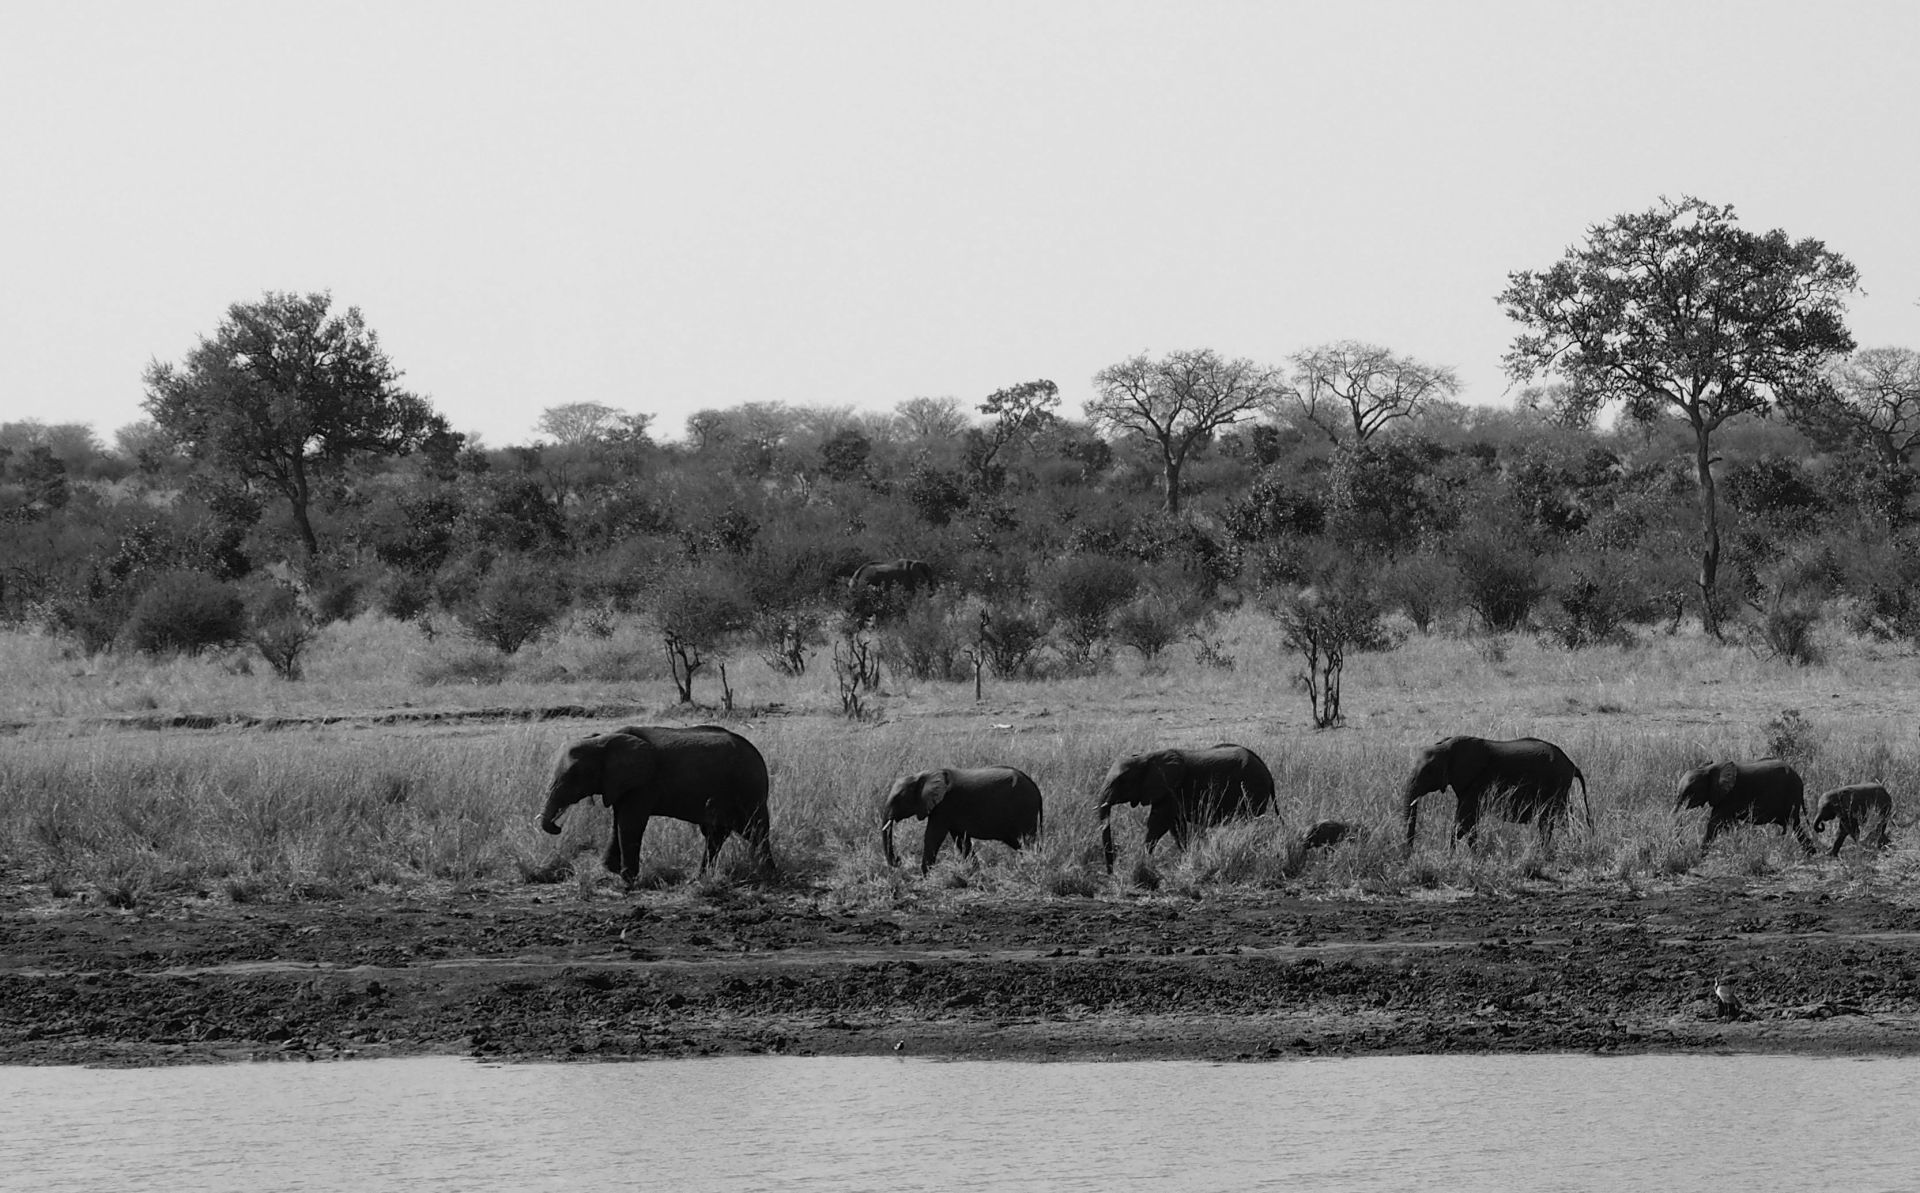 a herd of elephants are walking along the shore of a river